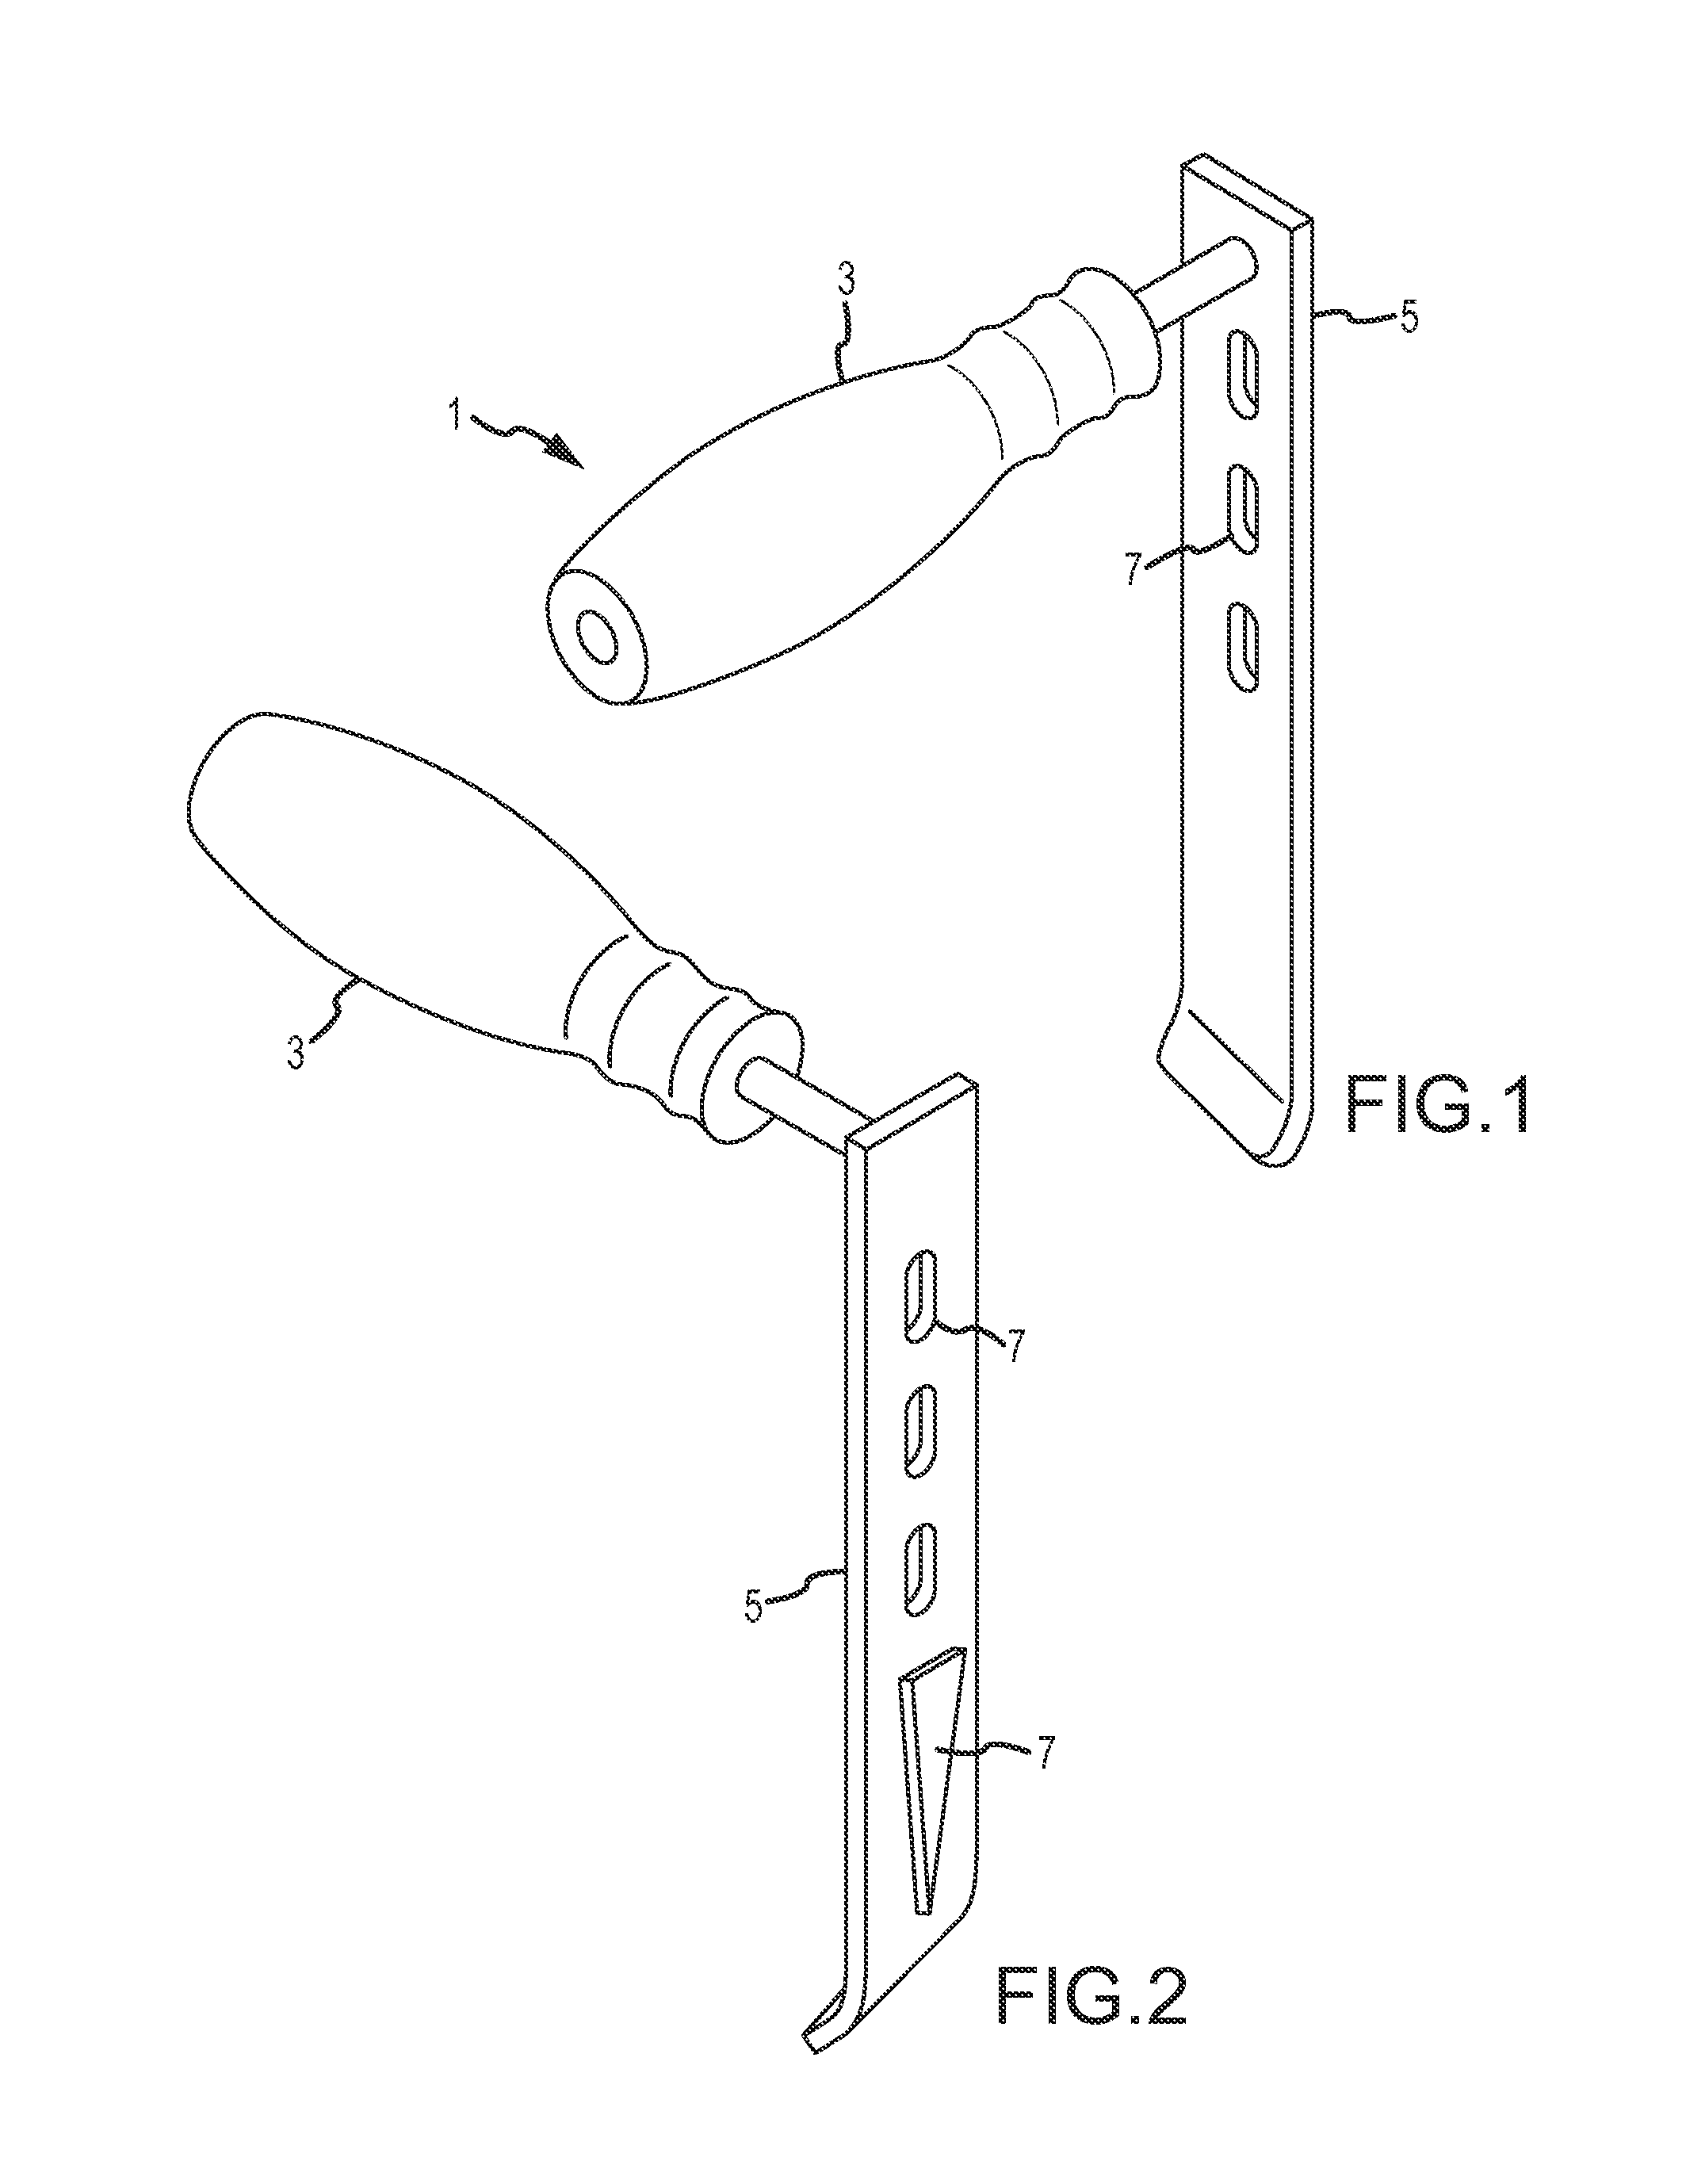 Method and apparatus for performing retro peritoneal dissection